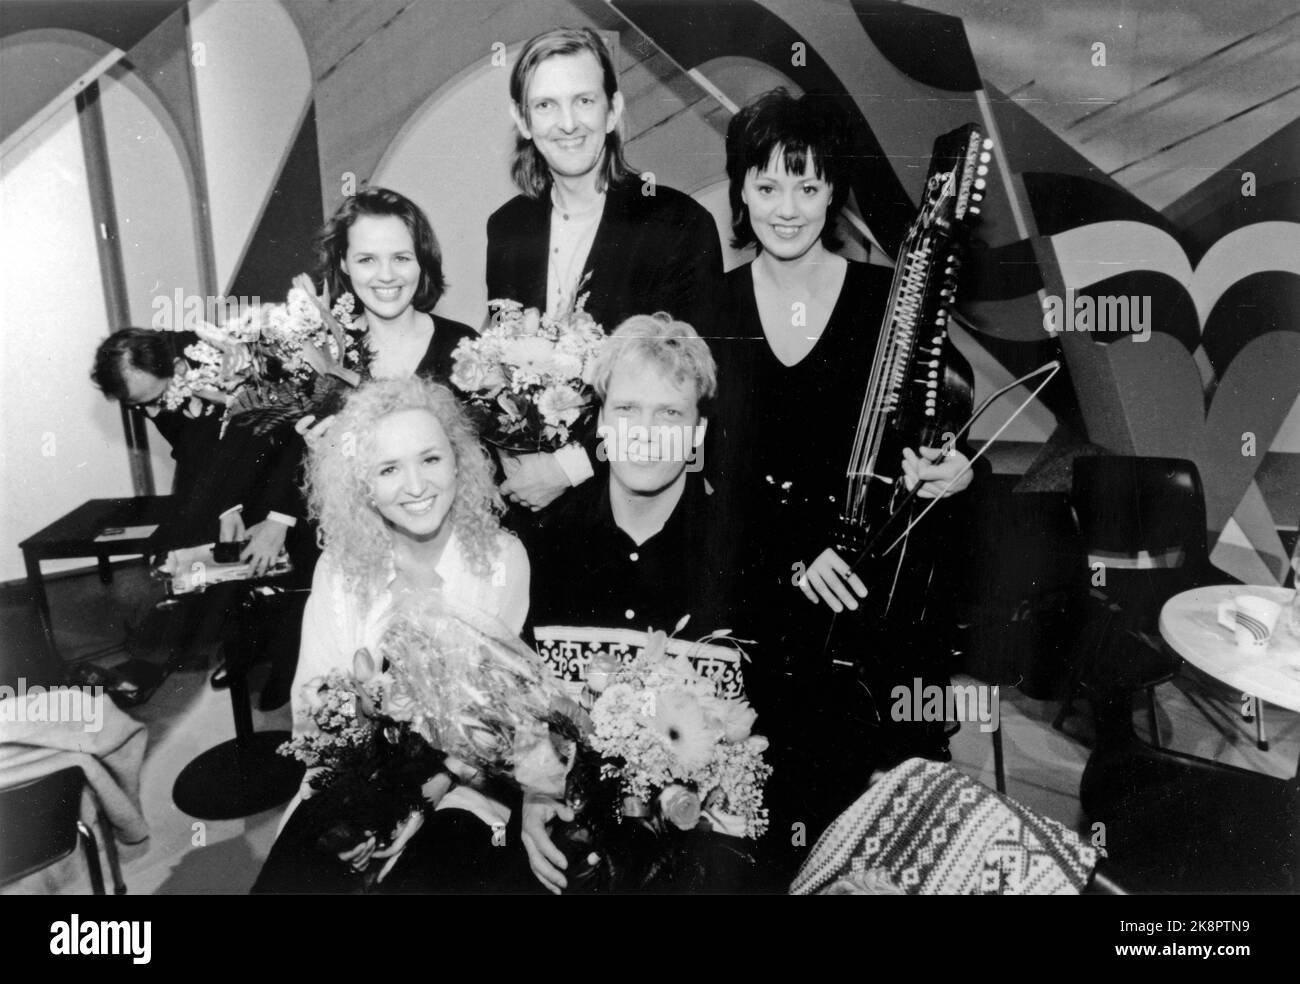 199505. The Norwegian group 'Secret Garden' with Rolf Løvland and Fionnuala Sherry photographed before the International of Eurovision Song Contest 1995. Photo: Johnny Syversen / NTBSCANPIX  Scannef: Secret61 Stock Photo